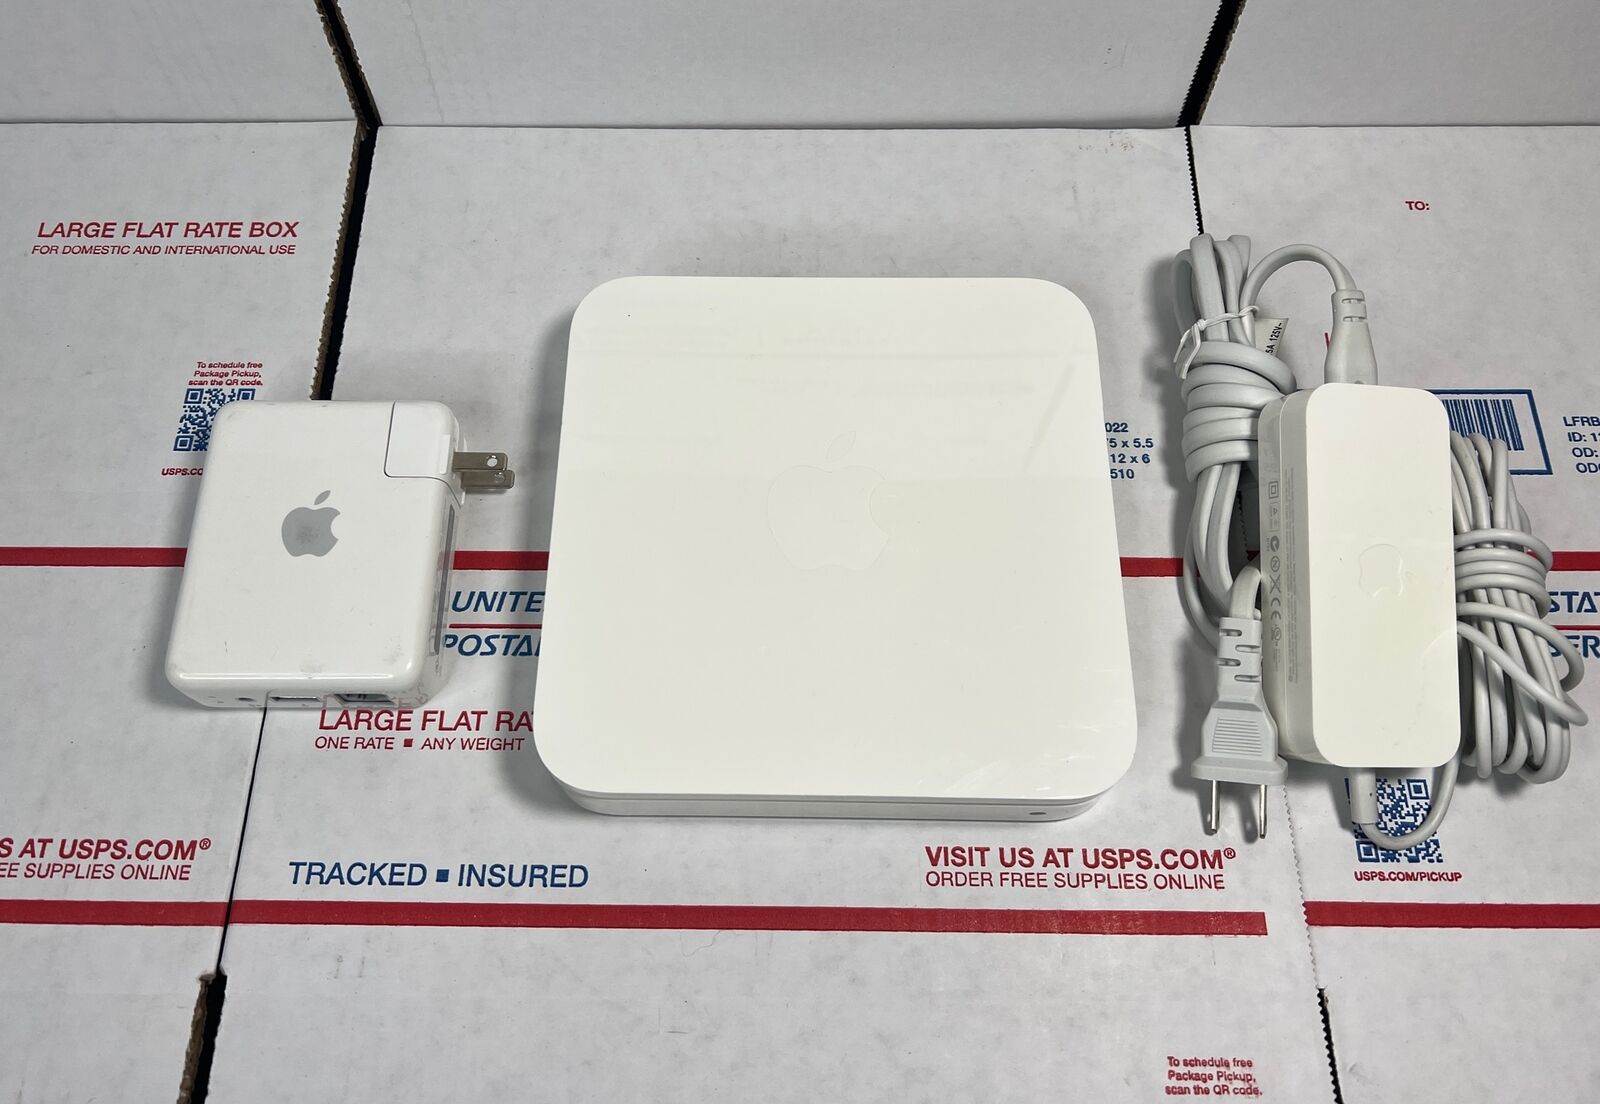 Apple AirPort Extreme Base Station A1301 802.11n Wi-Fi  + Apple A1084 - SAME DAY